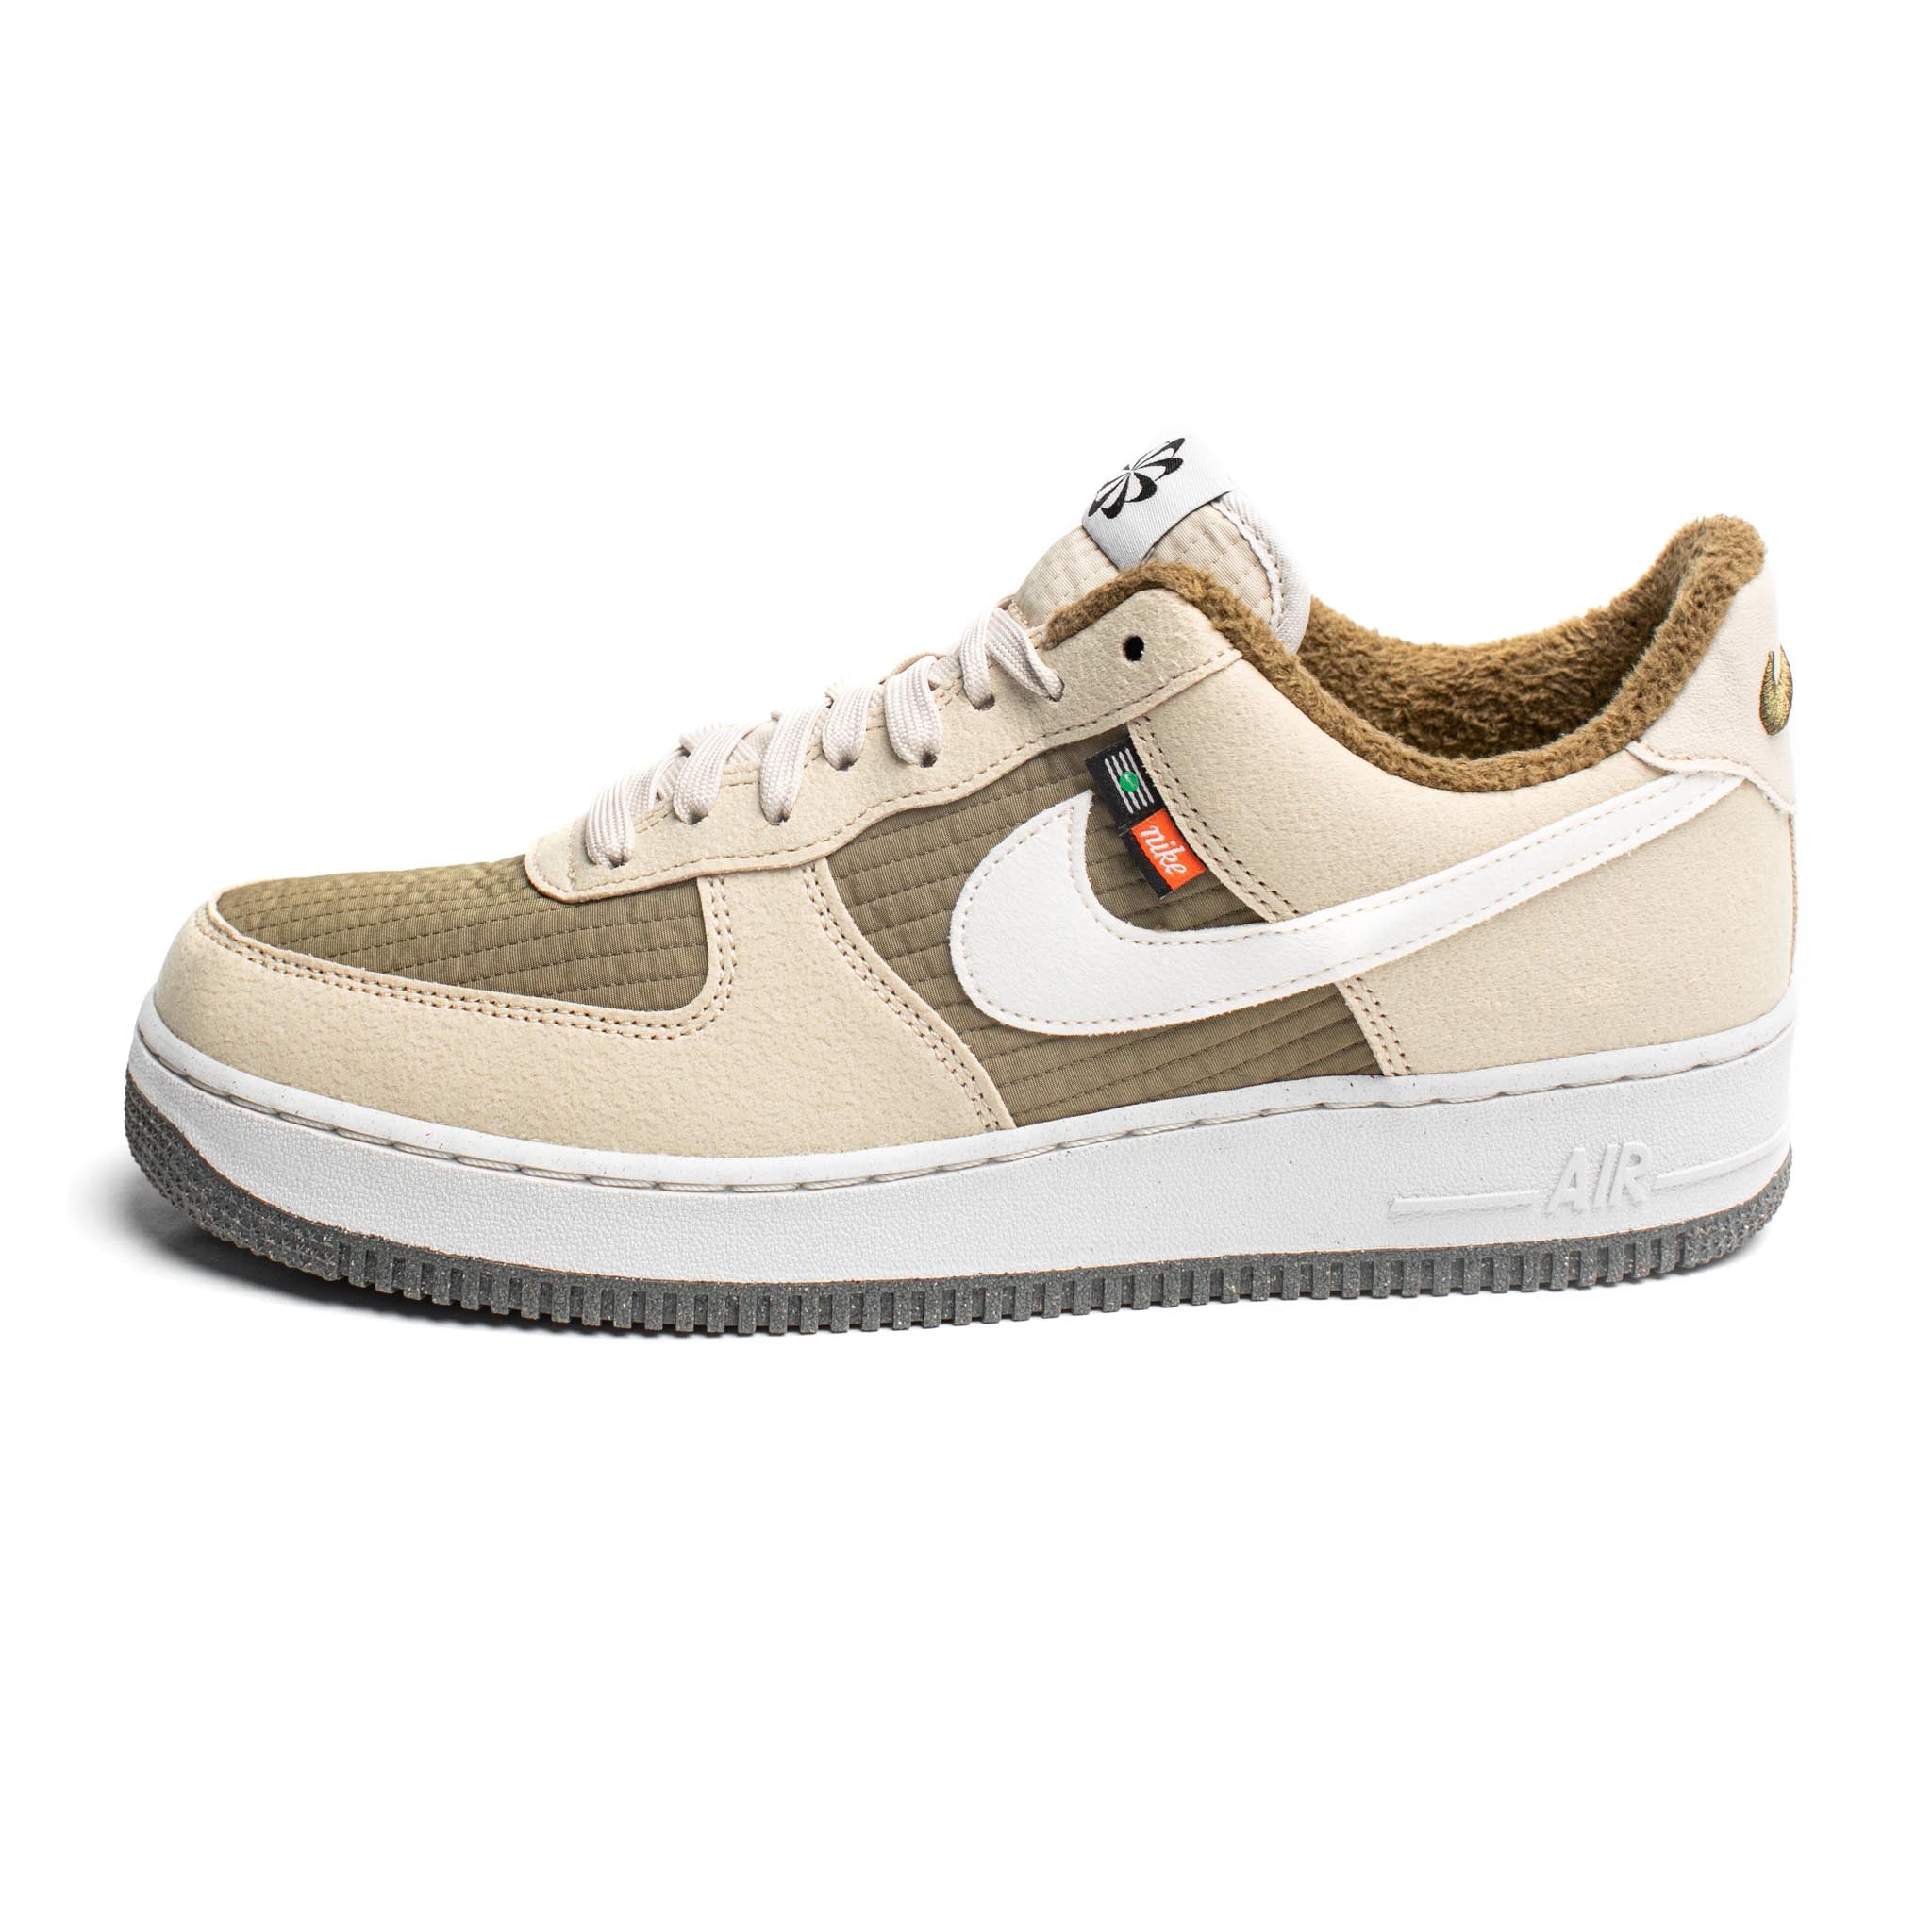 NIKE AIR FORCE ONE '07 LV8 **TOASTY** DC8871-200 SIZE 7.5 NEW IN BOX NO LID